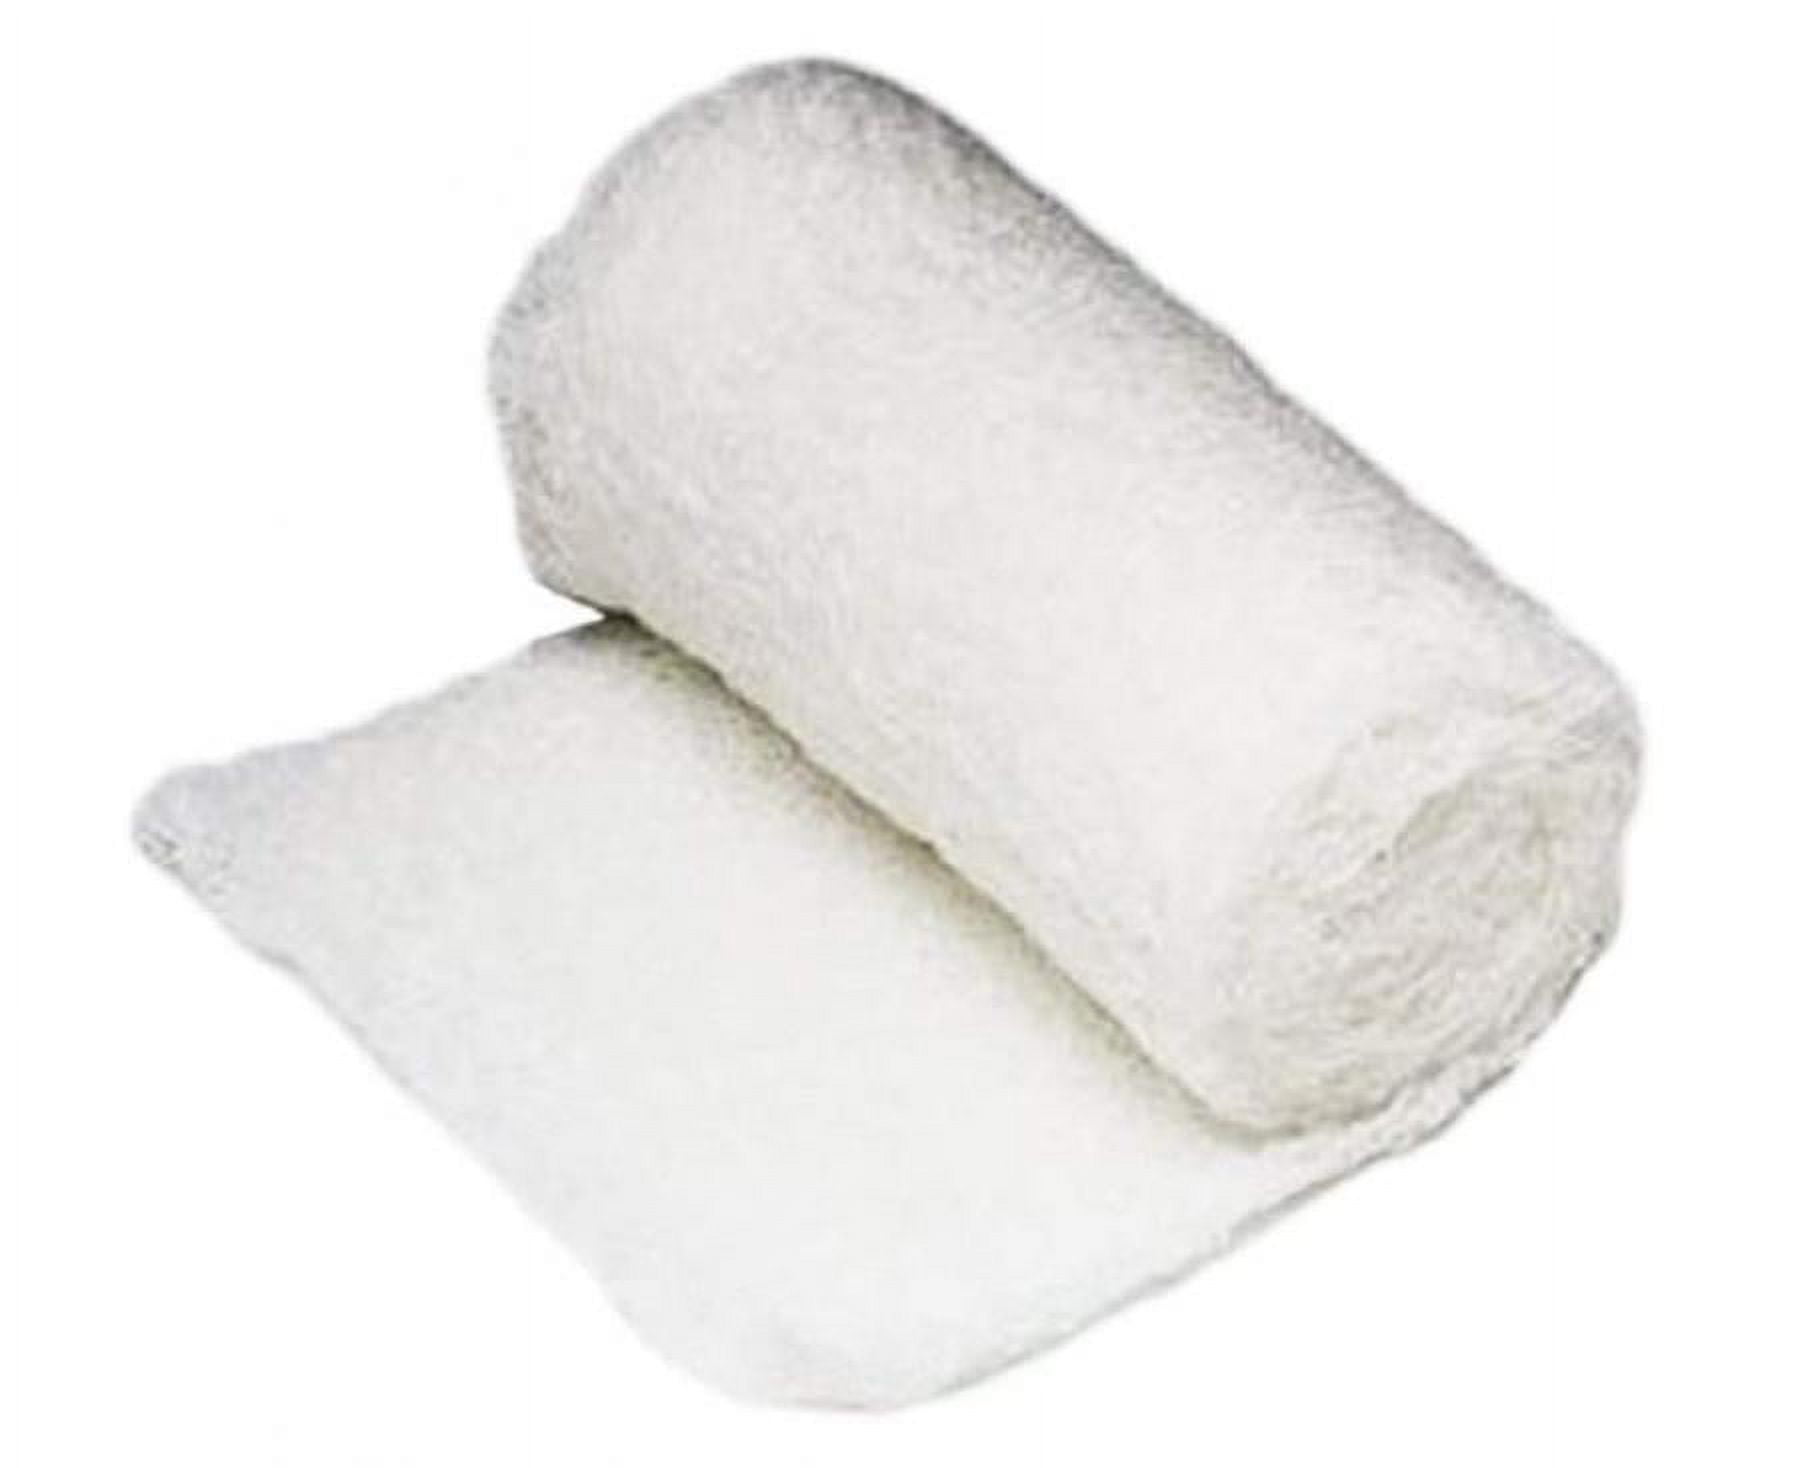 Kerlix Fluff Bandage Roll, 6-Ply, 4.5 Inches x 4.1 Yards, White, Non-sterile,  48 Count 